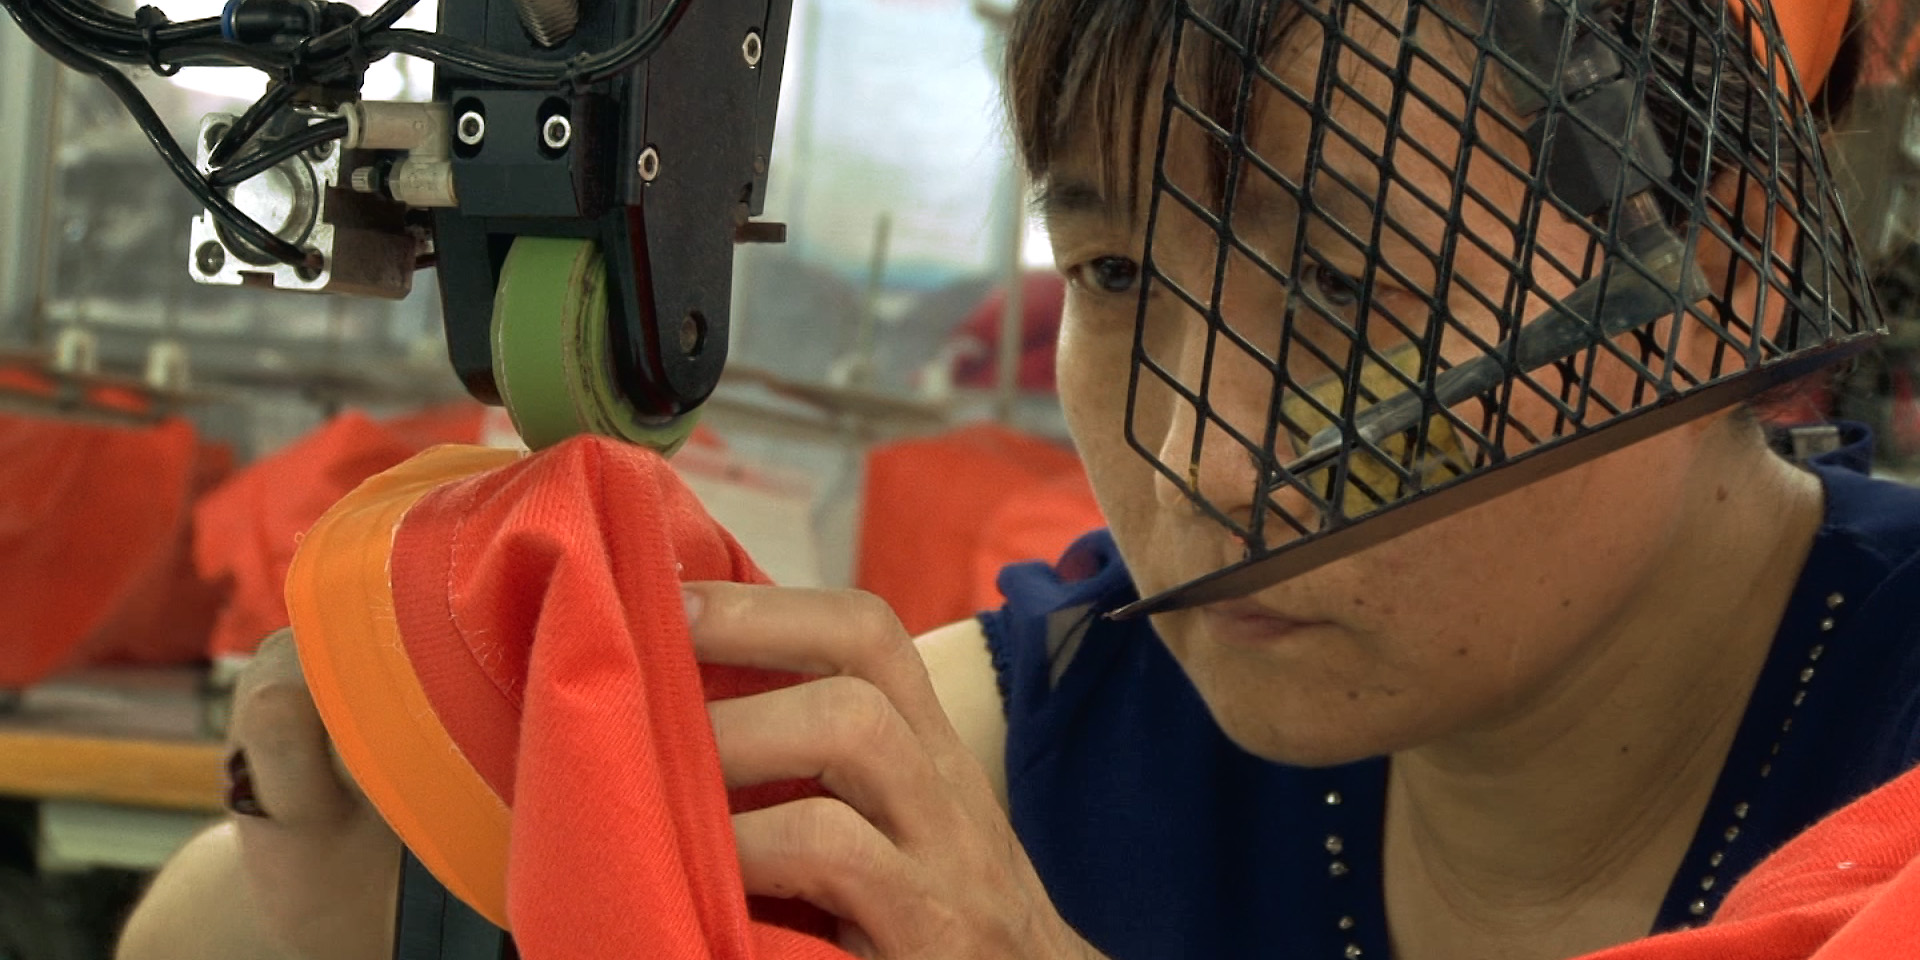 VAUDE | "Bekleidungs-Produktion in Asien" | Commercial Documentary